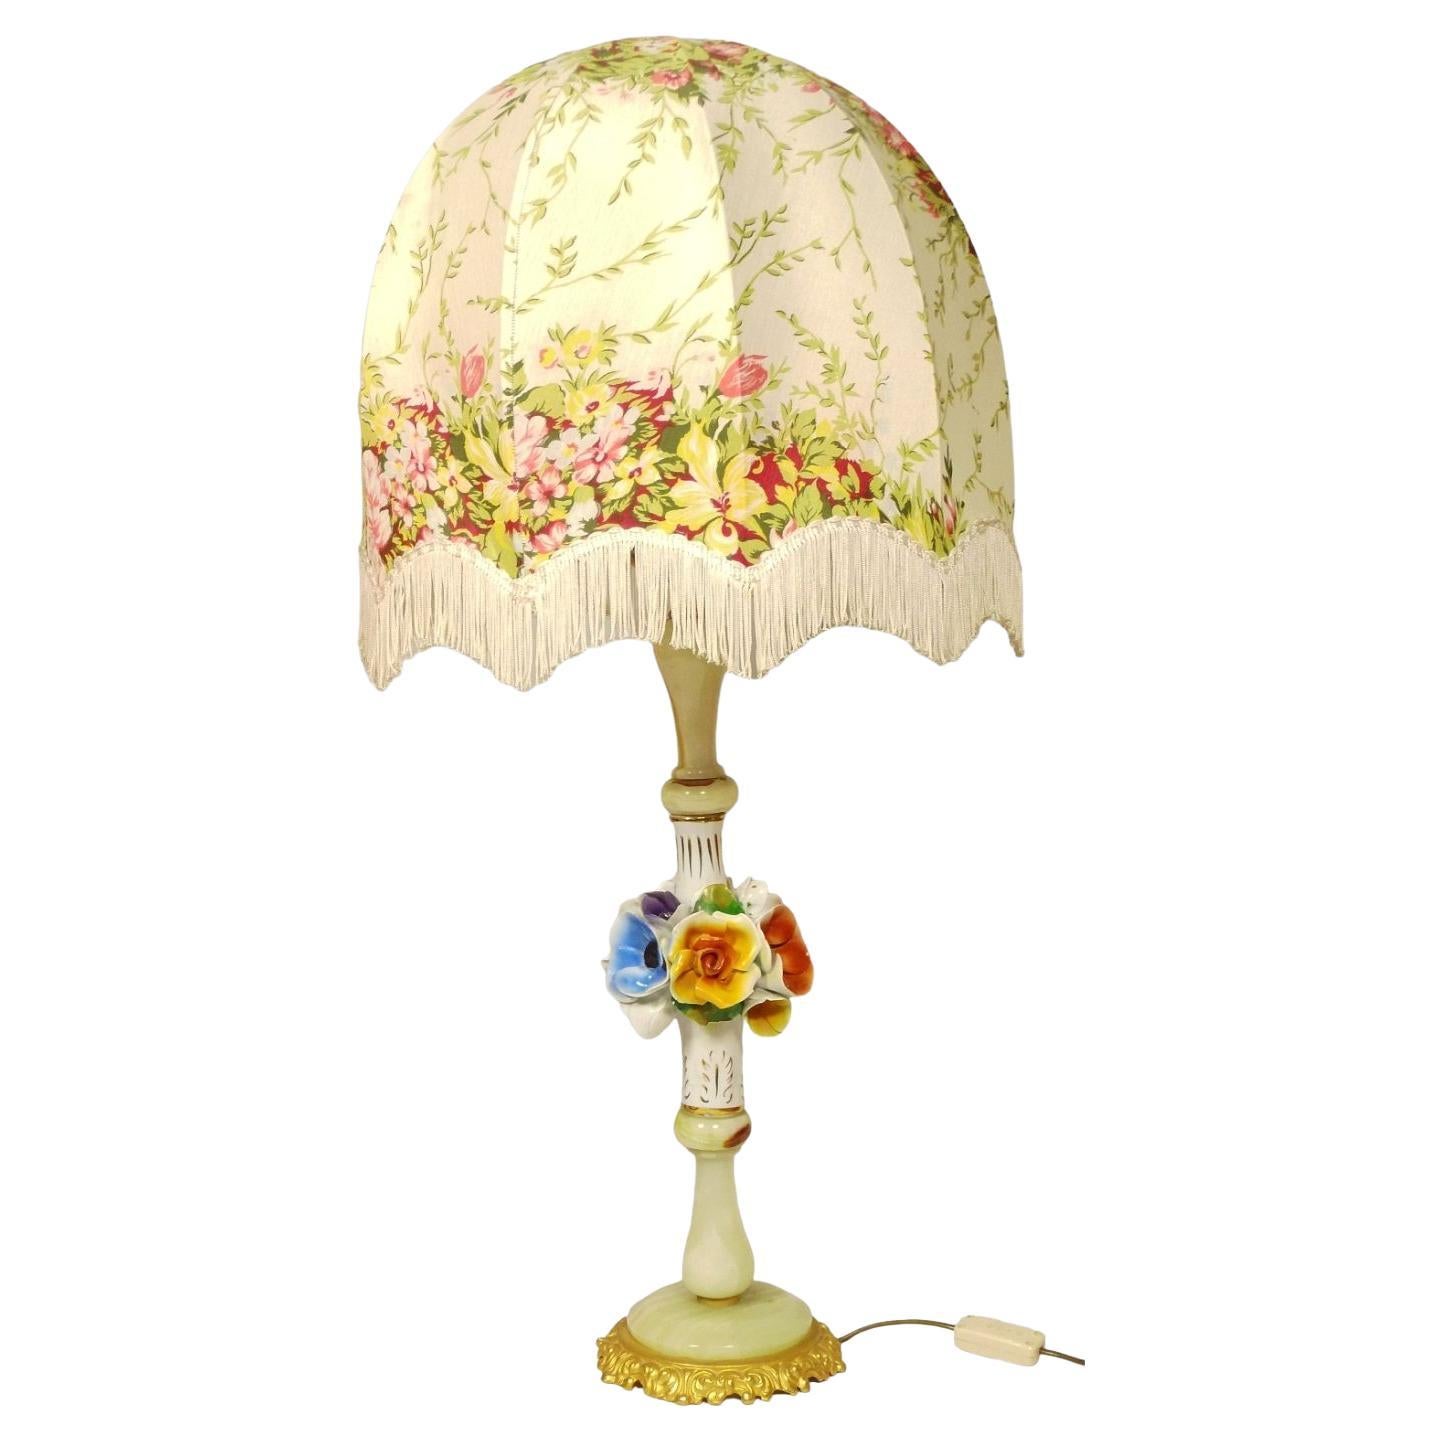 Exclusive large table lamp from the 1950s, porcelain, fringes